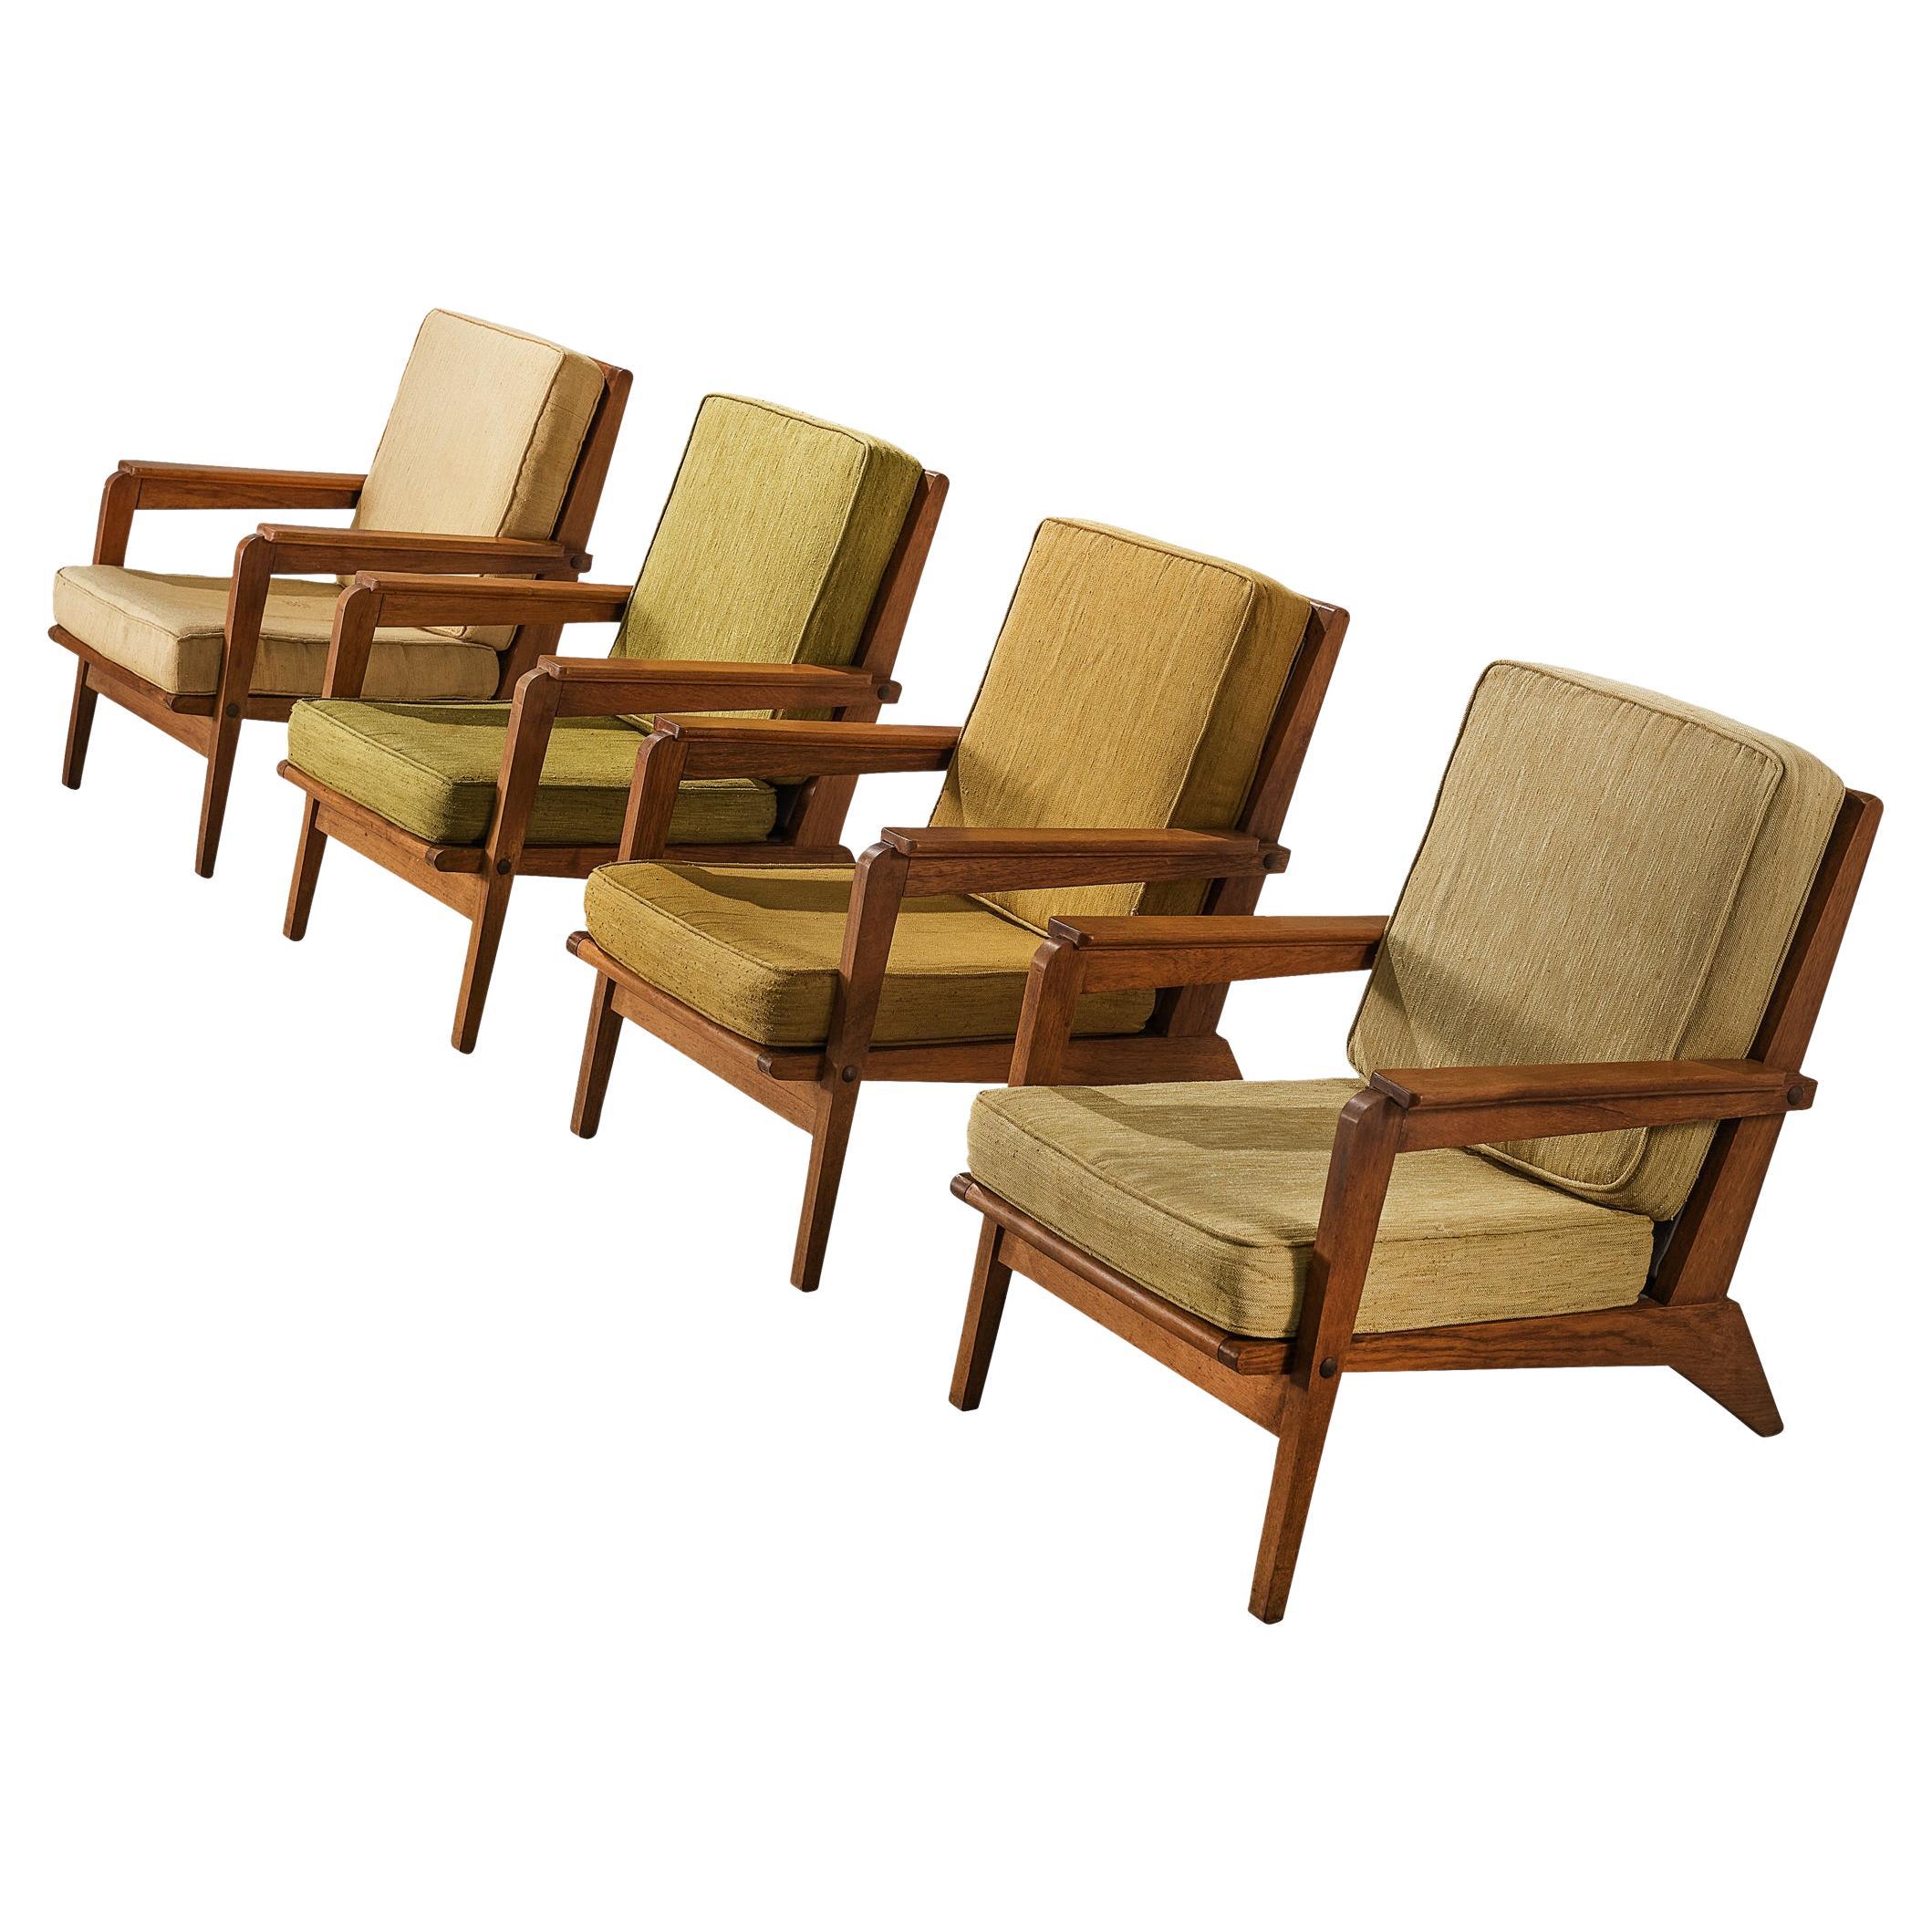 1940s French Set of Four Lounge Chairs with Constructivist Wooden Frame